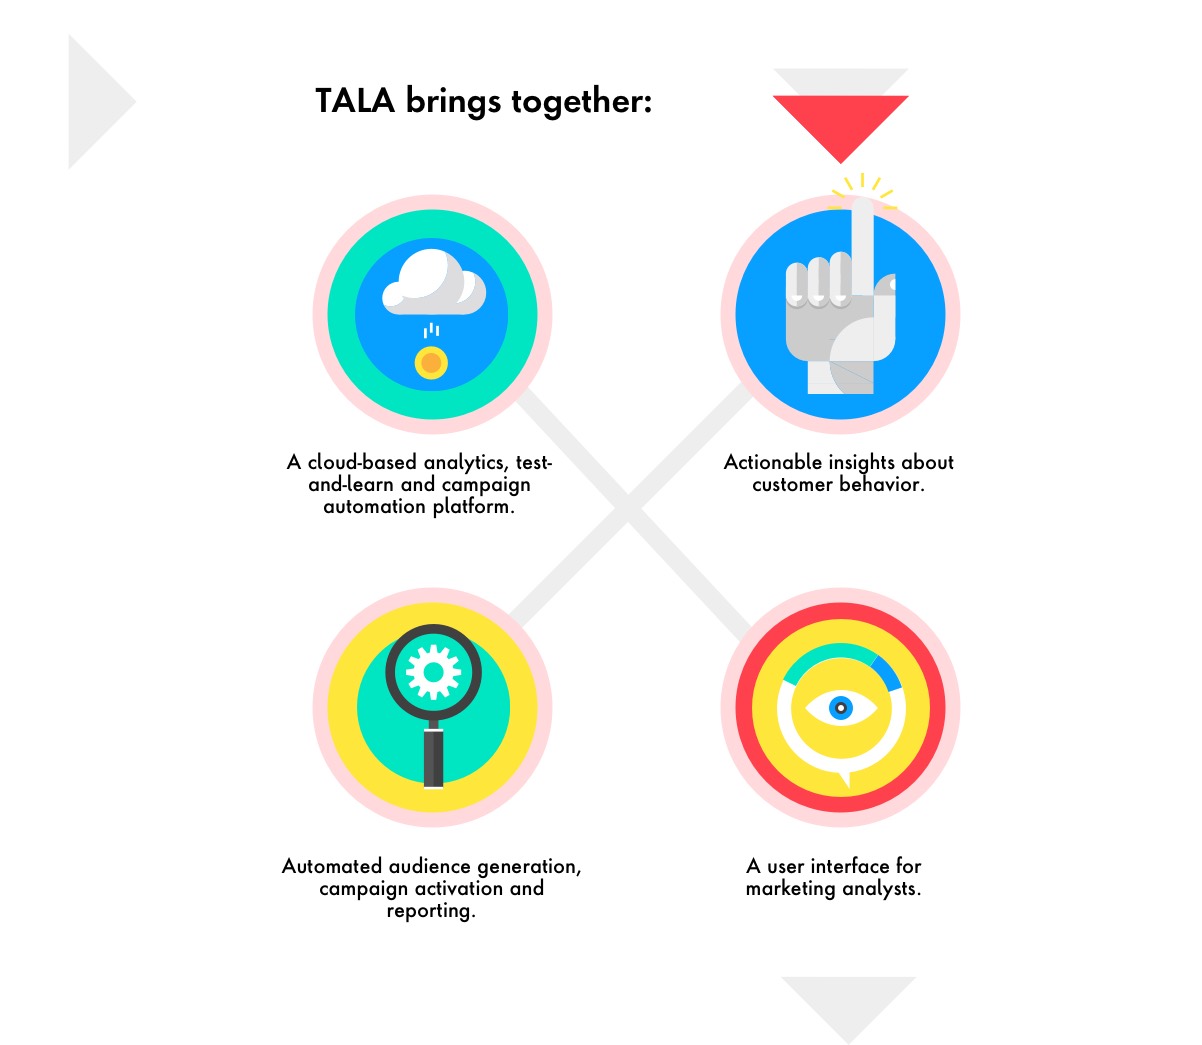 Graphic explaining that TALA unites cloud-based analytics, actionable insights, automated audience generation and a marketing user interface.